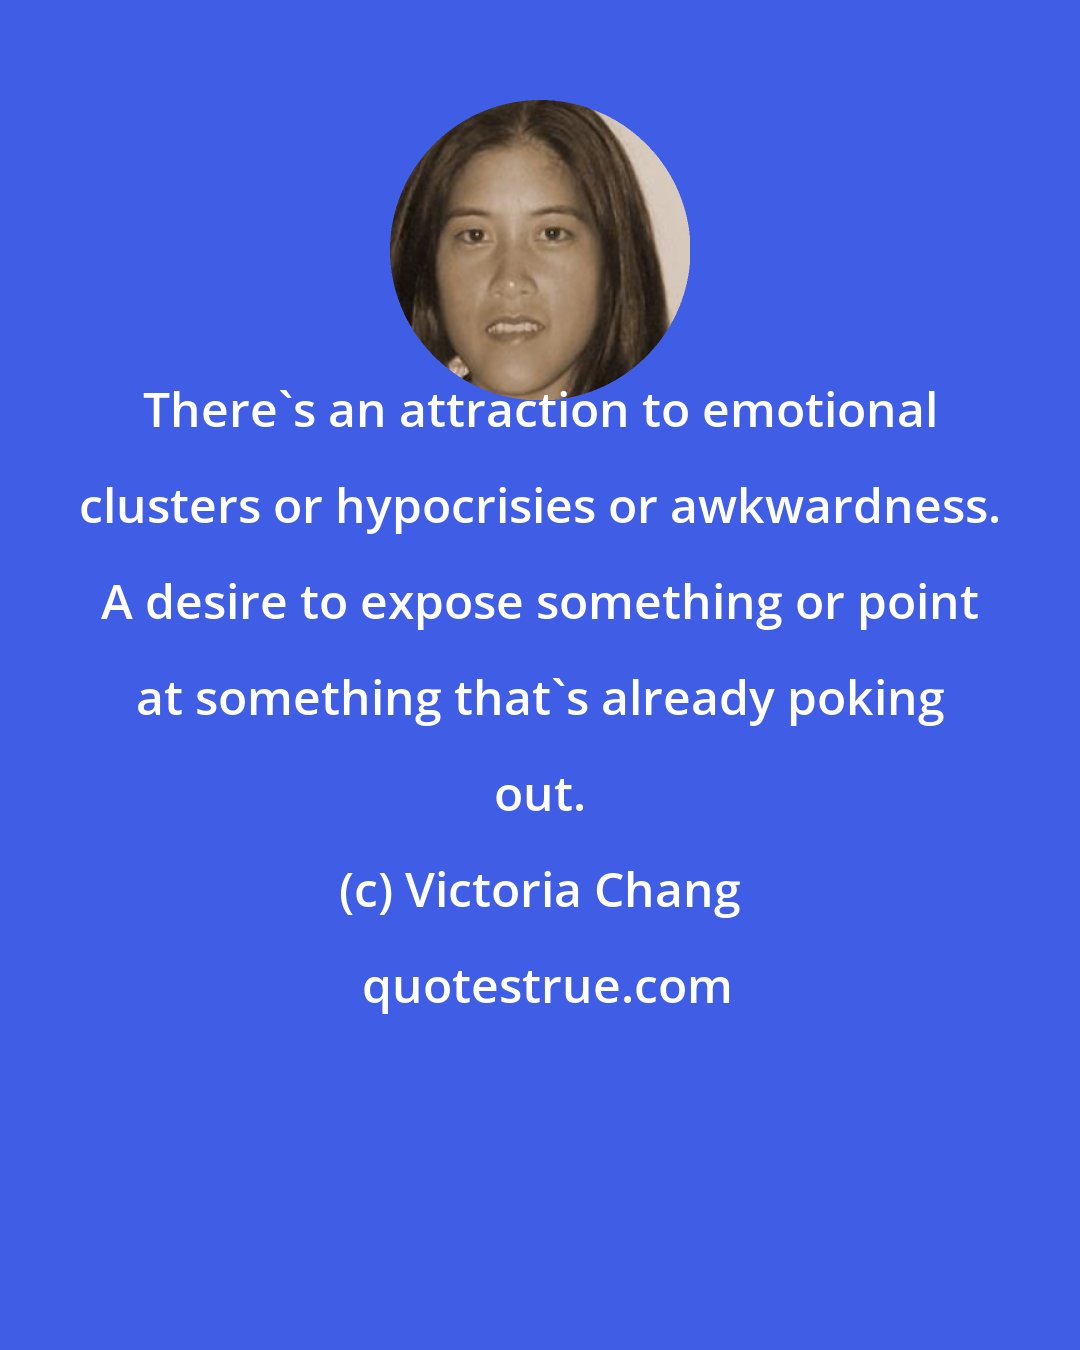 Victoria Chang: There's an attraction to emotional clusters or hypocrisies or awkwardness. A desire to expose something or point at something that's already poking out.